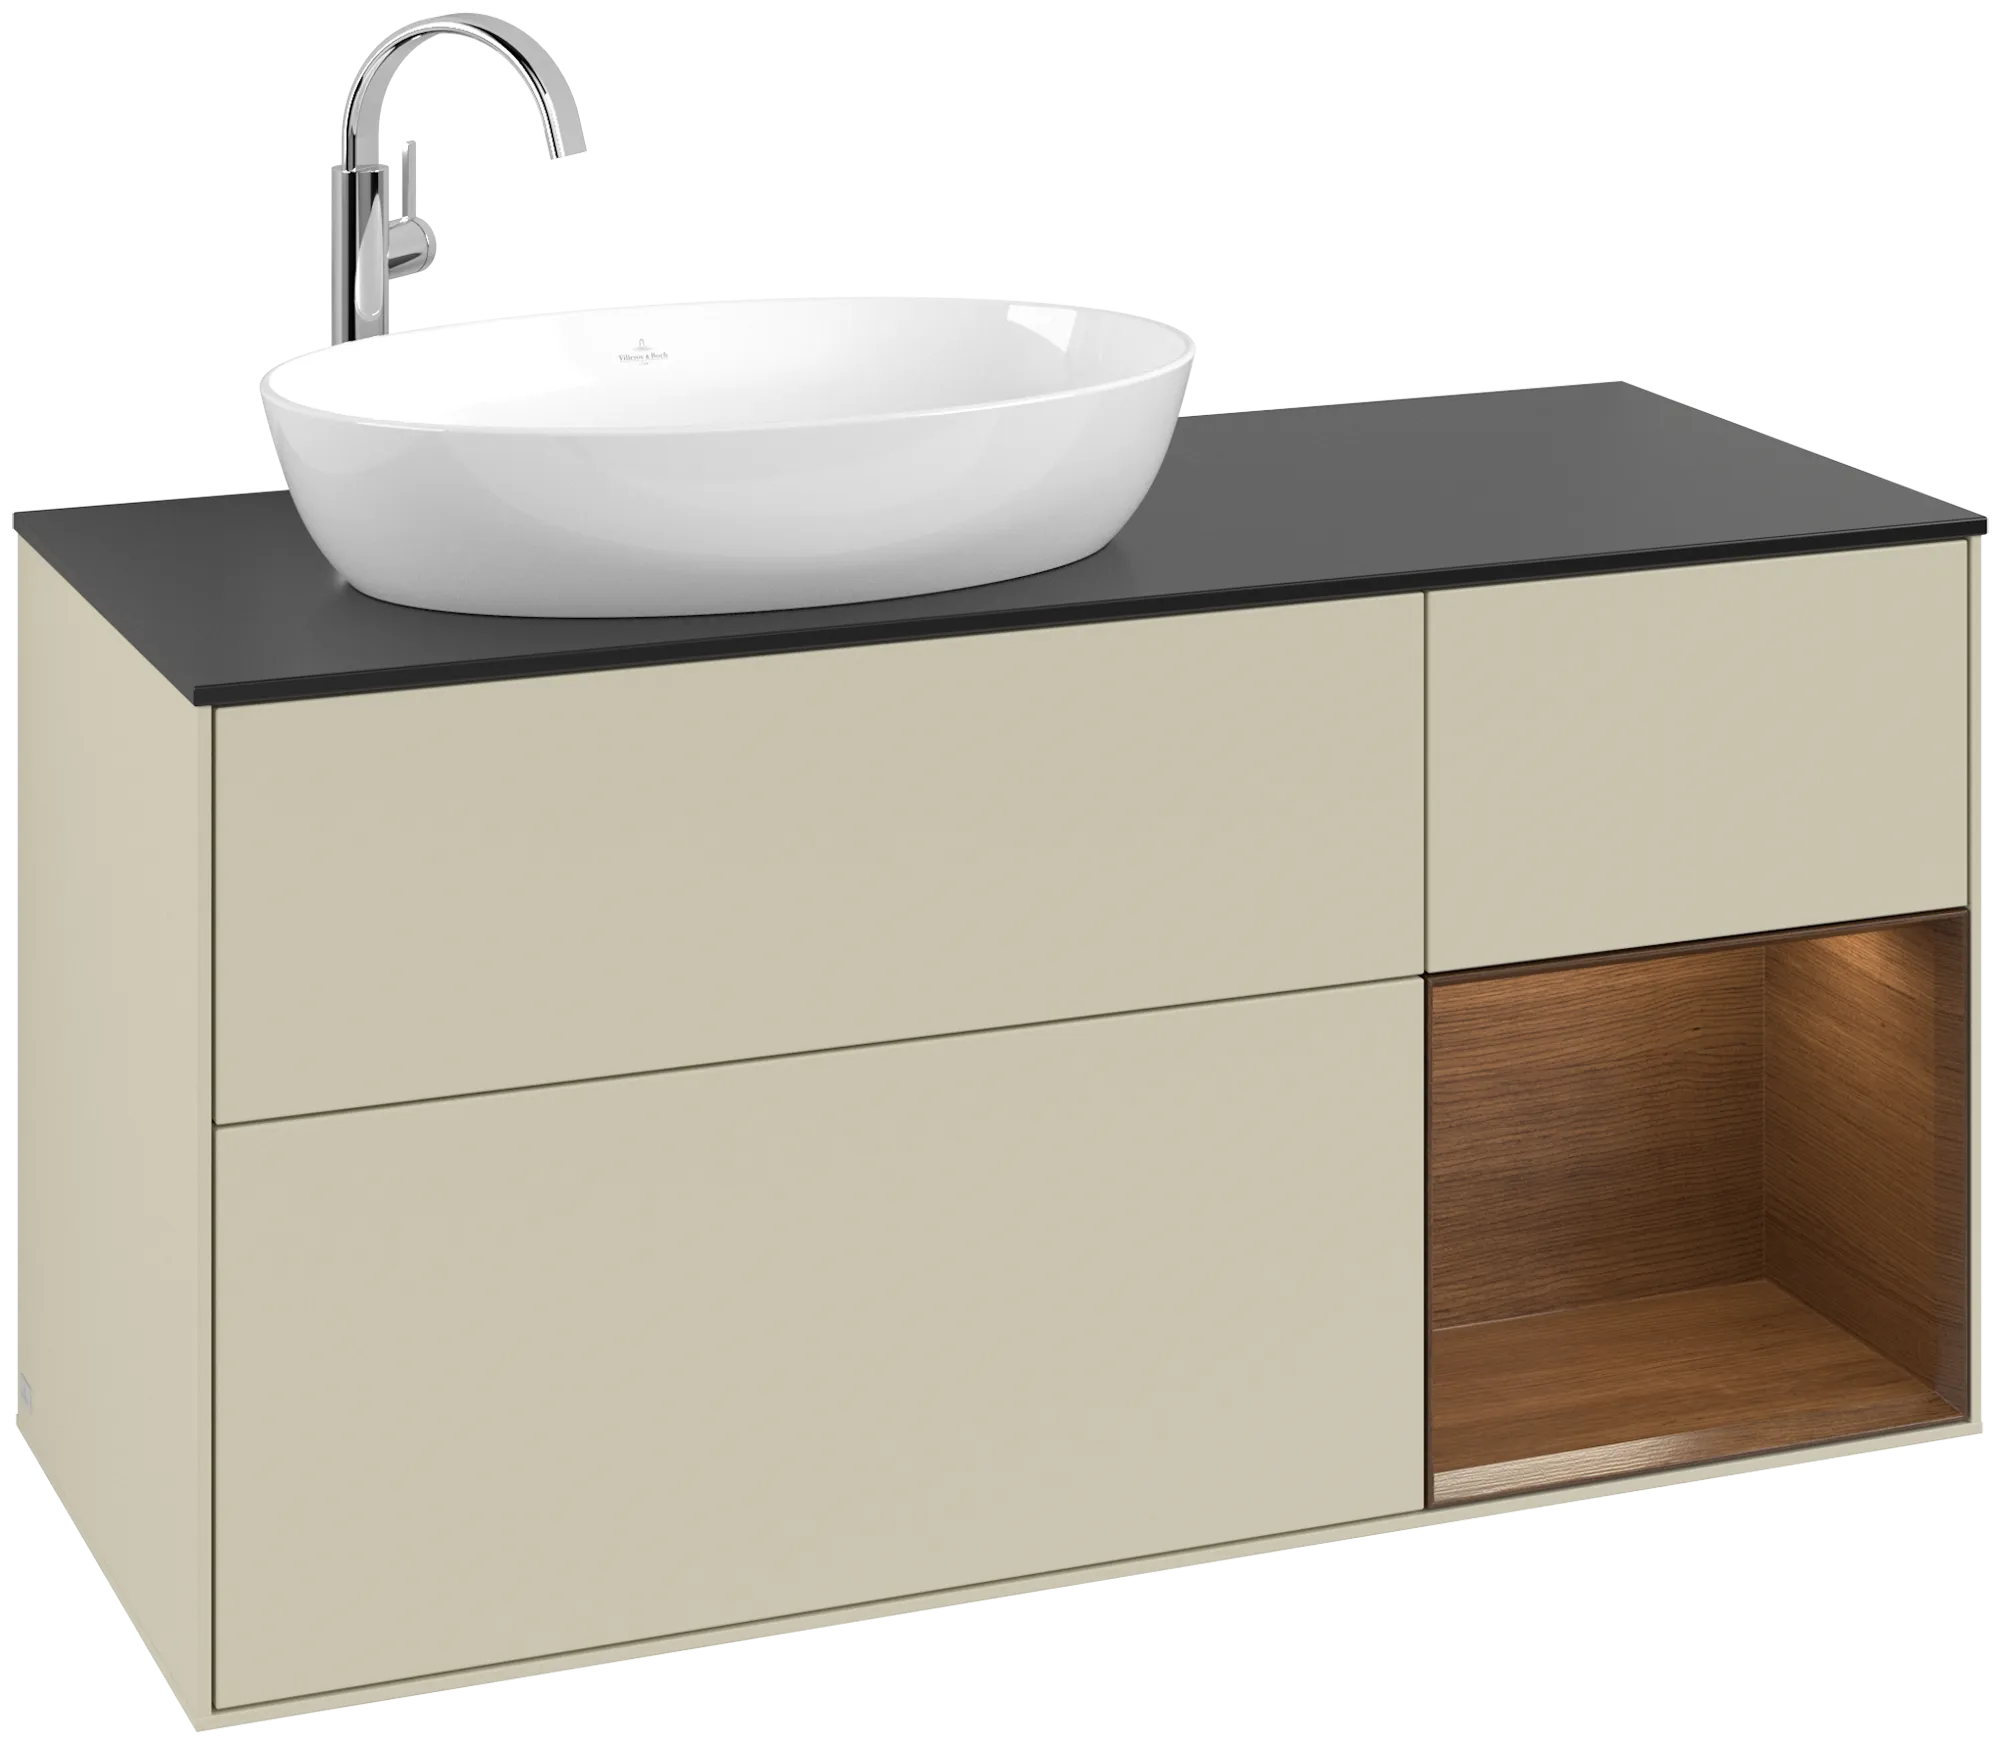 Picture of VILLEROY BOCH Finion Vanity unit, with lighting, 3 pull-out compartments, 1200 x 603 x 501 mm, Silk Grey Matt Lacquer / Walnut Veneer / Glass Black Matt #G932GNHJ